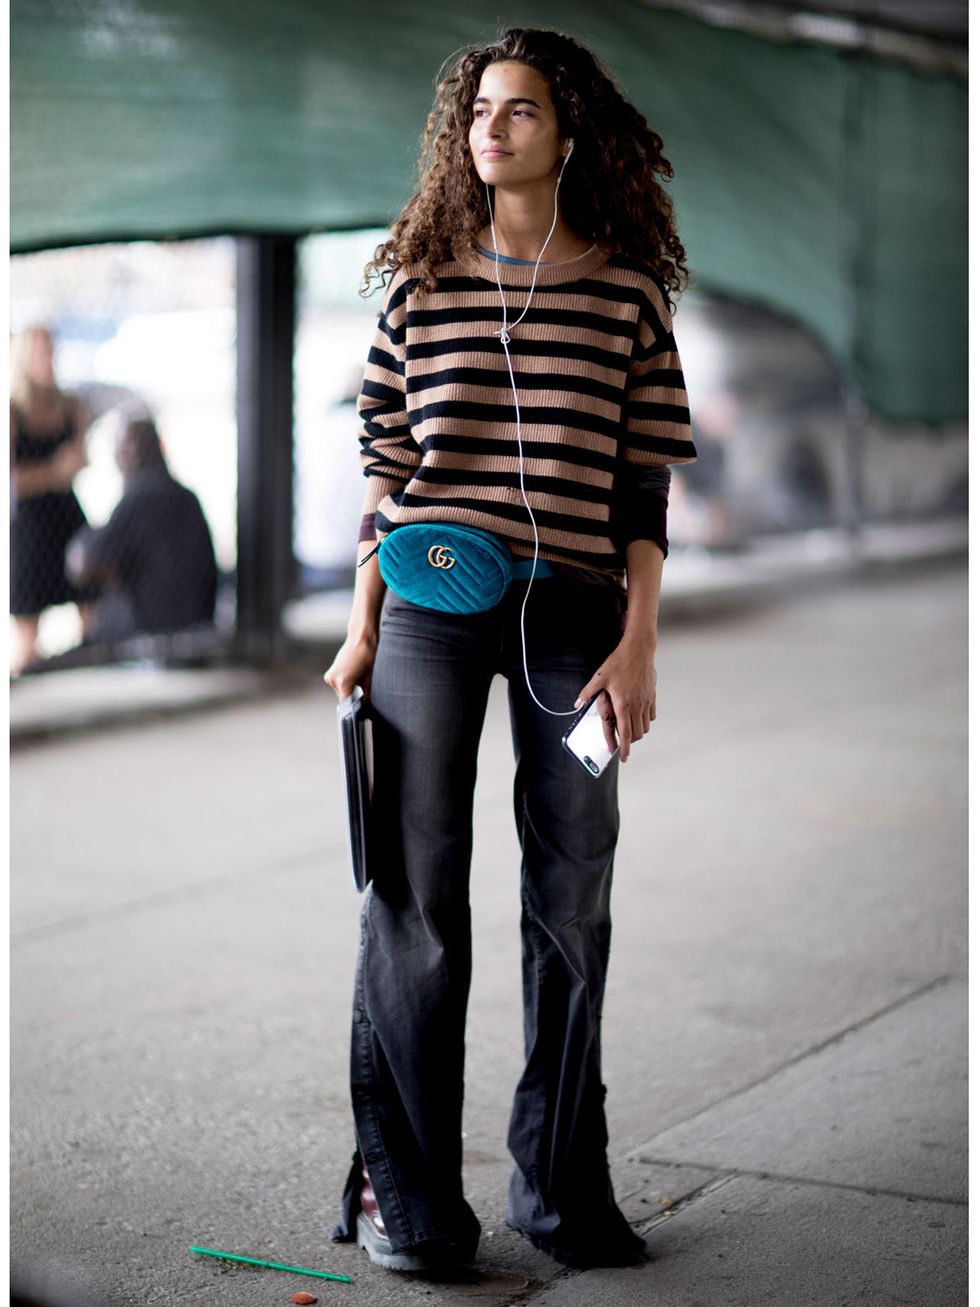 Jeans, Clothing, Street fashion, Fashion, Standing, Beauty, Snapshot, Turquoise, Footwear, Shoulder, 